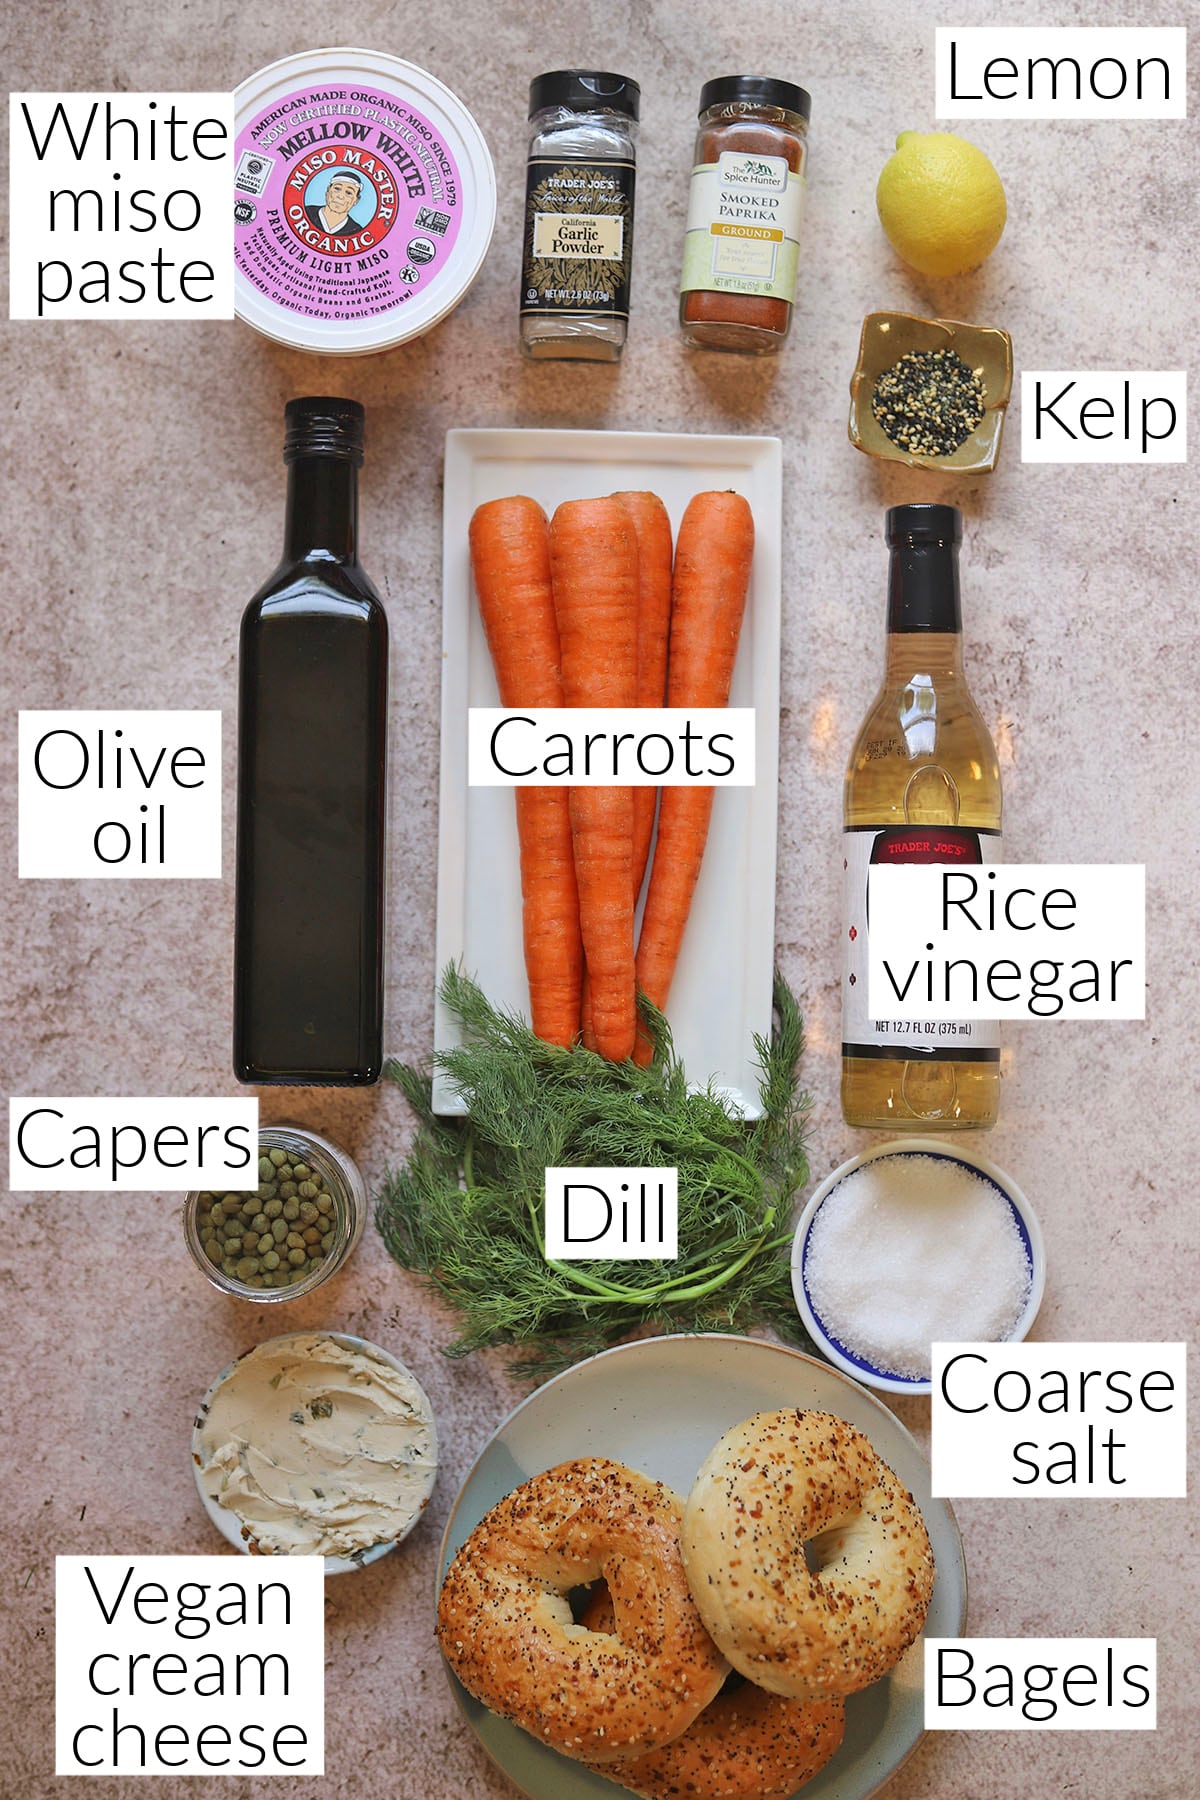 Labeled ingredients for carrot lox.